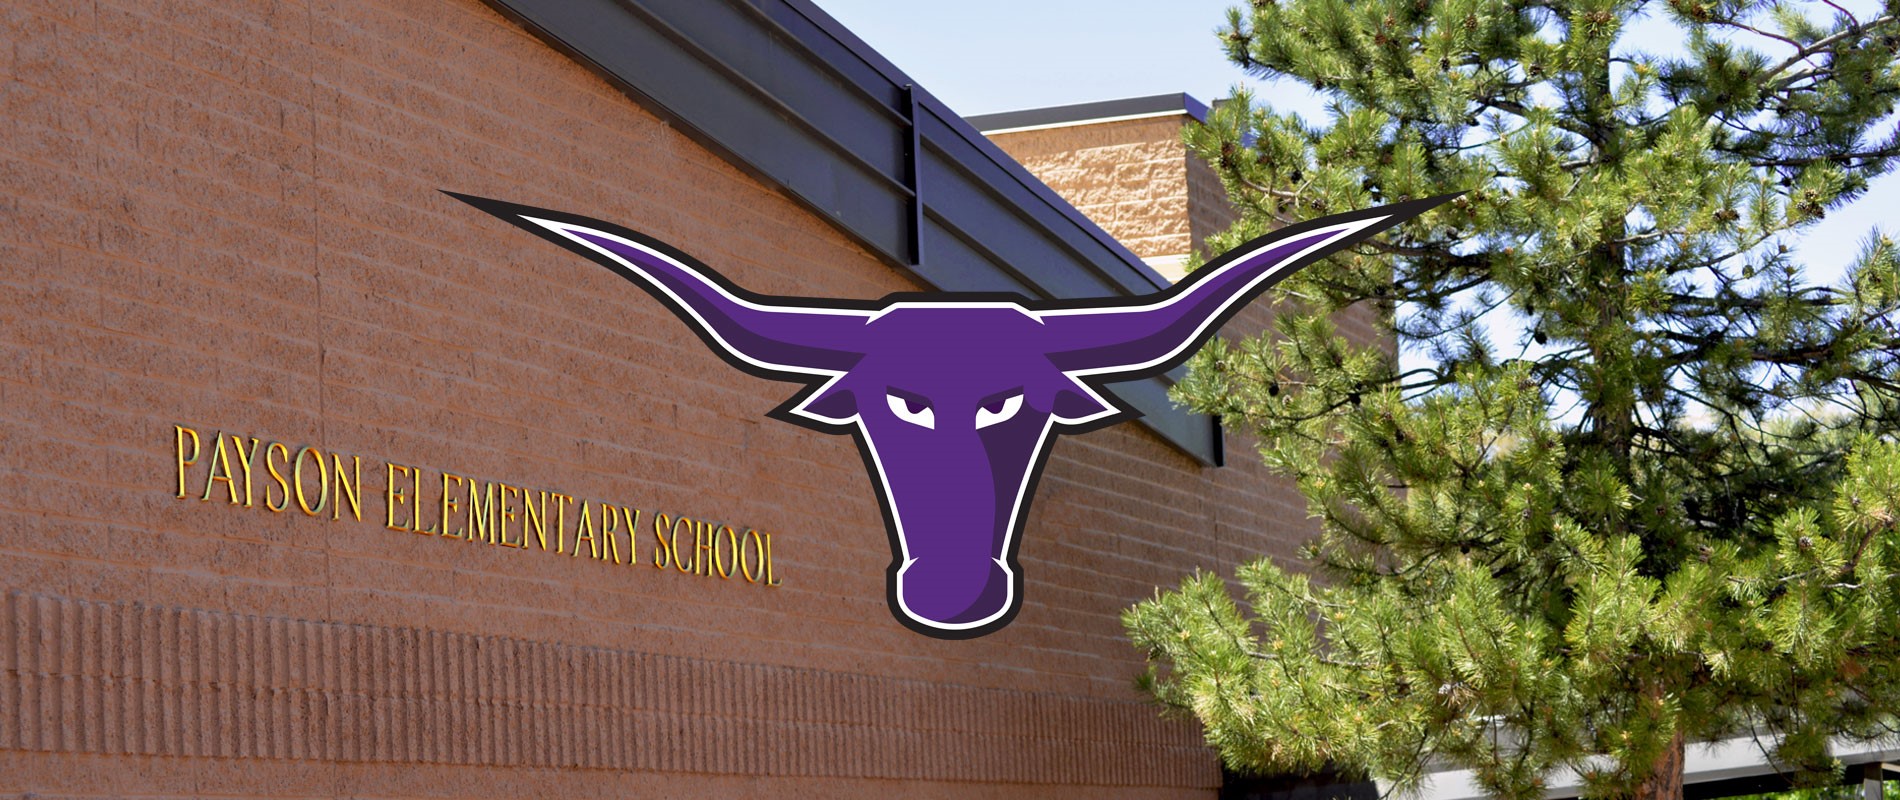 Payson Elementary School building with the Longhorn logo